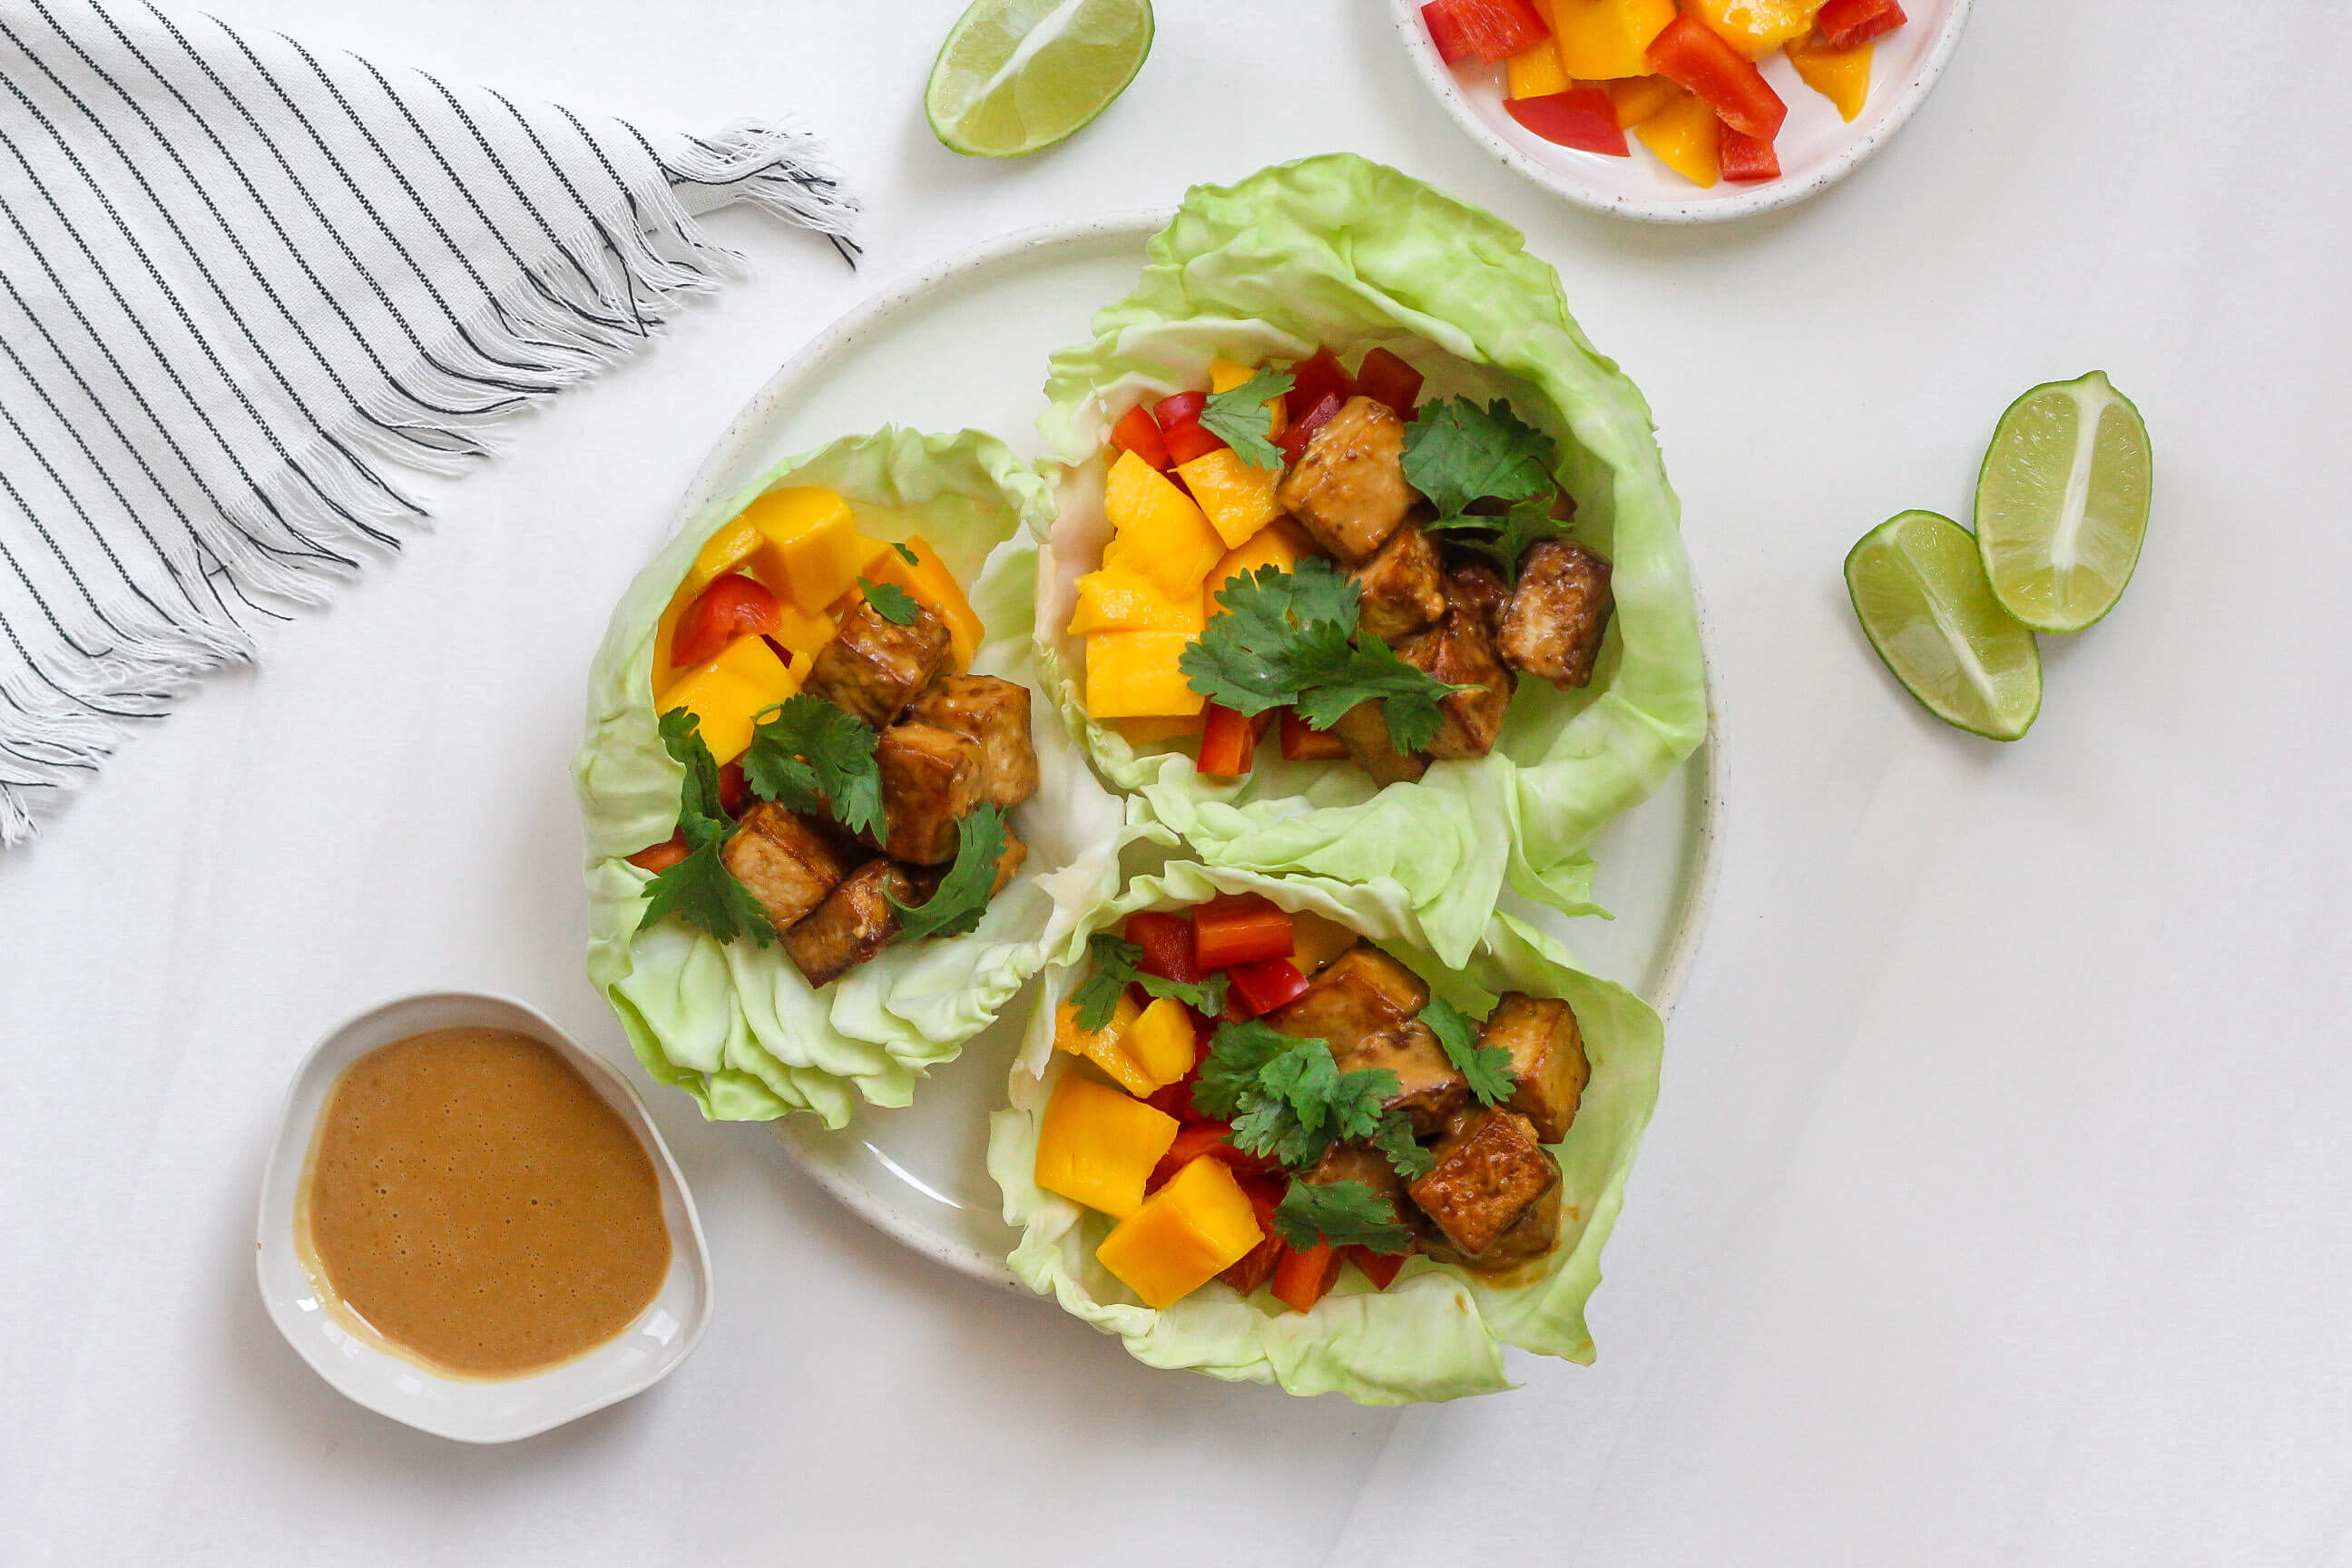 20 High Protein, Plant-Based Meals Your Clients Will Love: Tofu Cabbage Wraps with Peanut Sauce